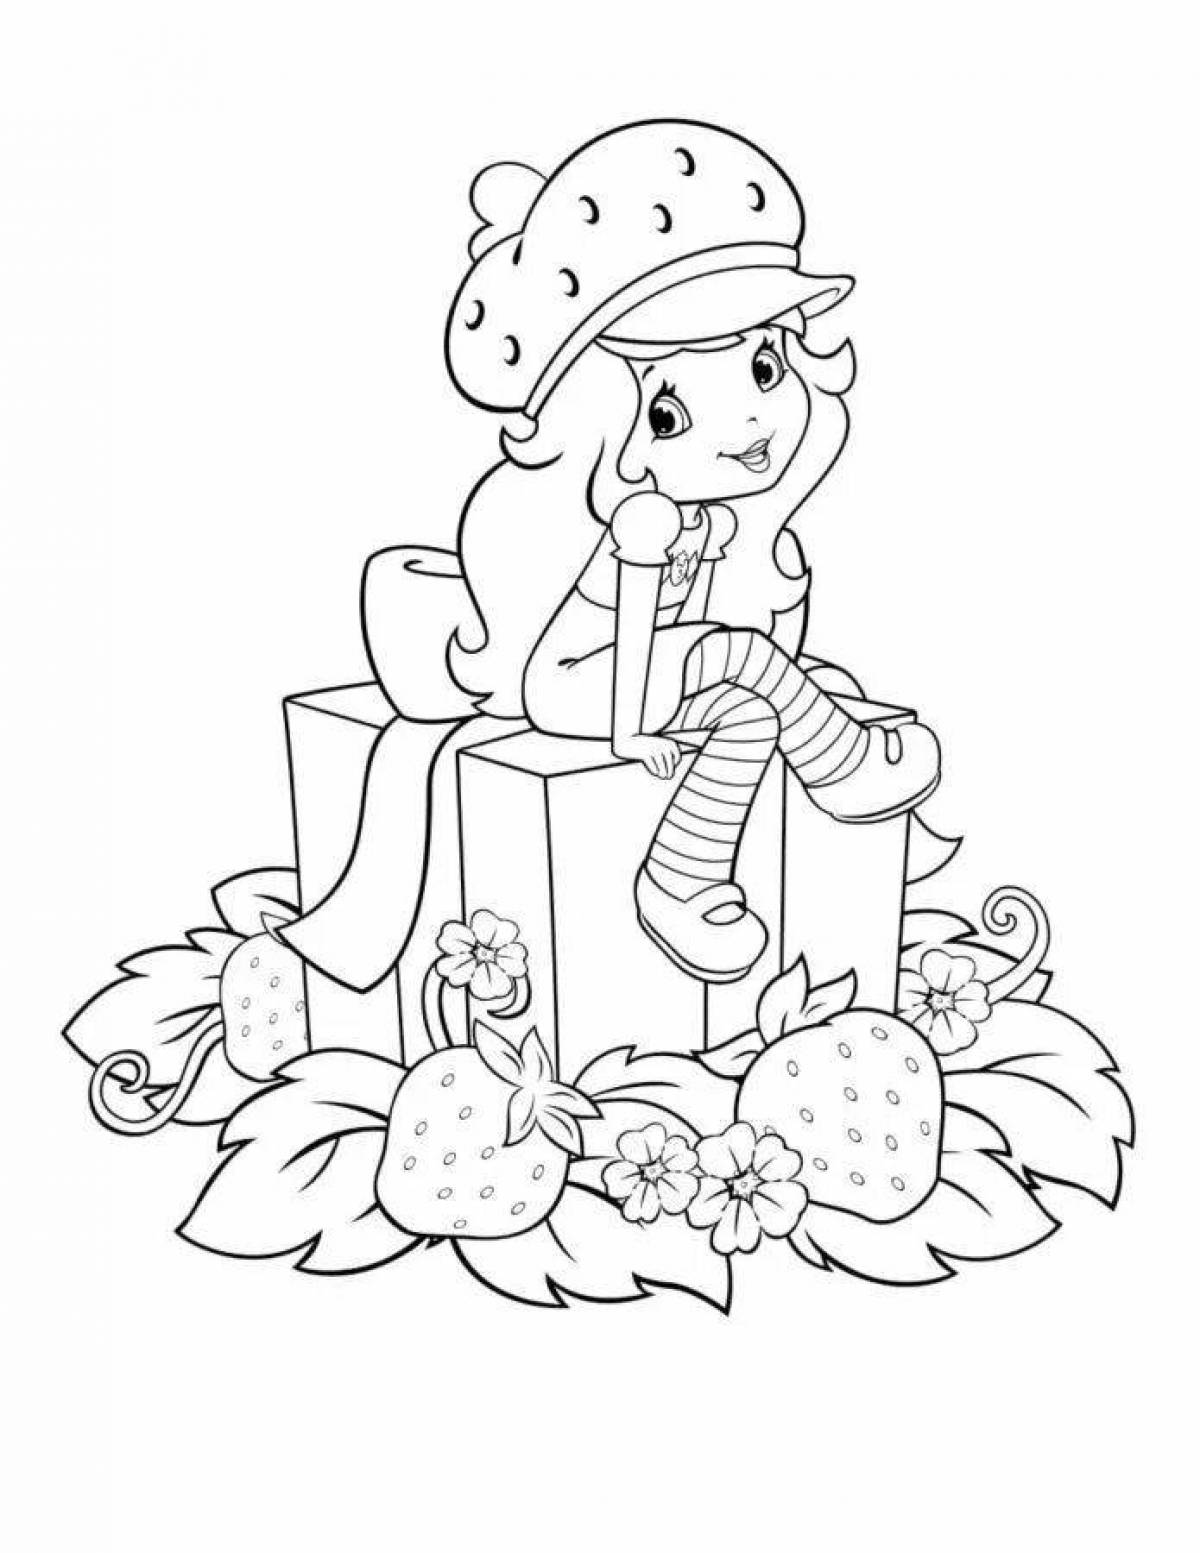 Sunny strawberry coloring page